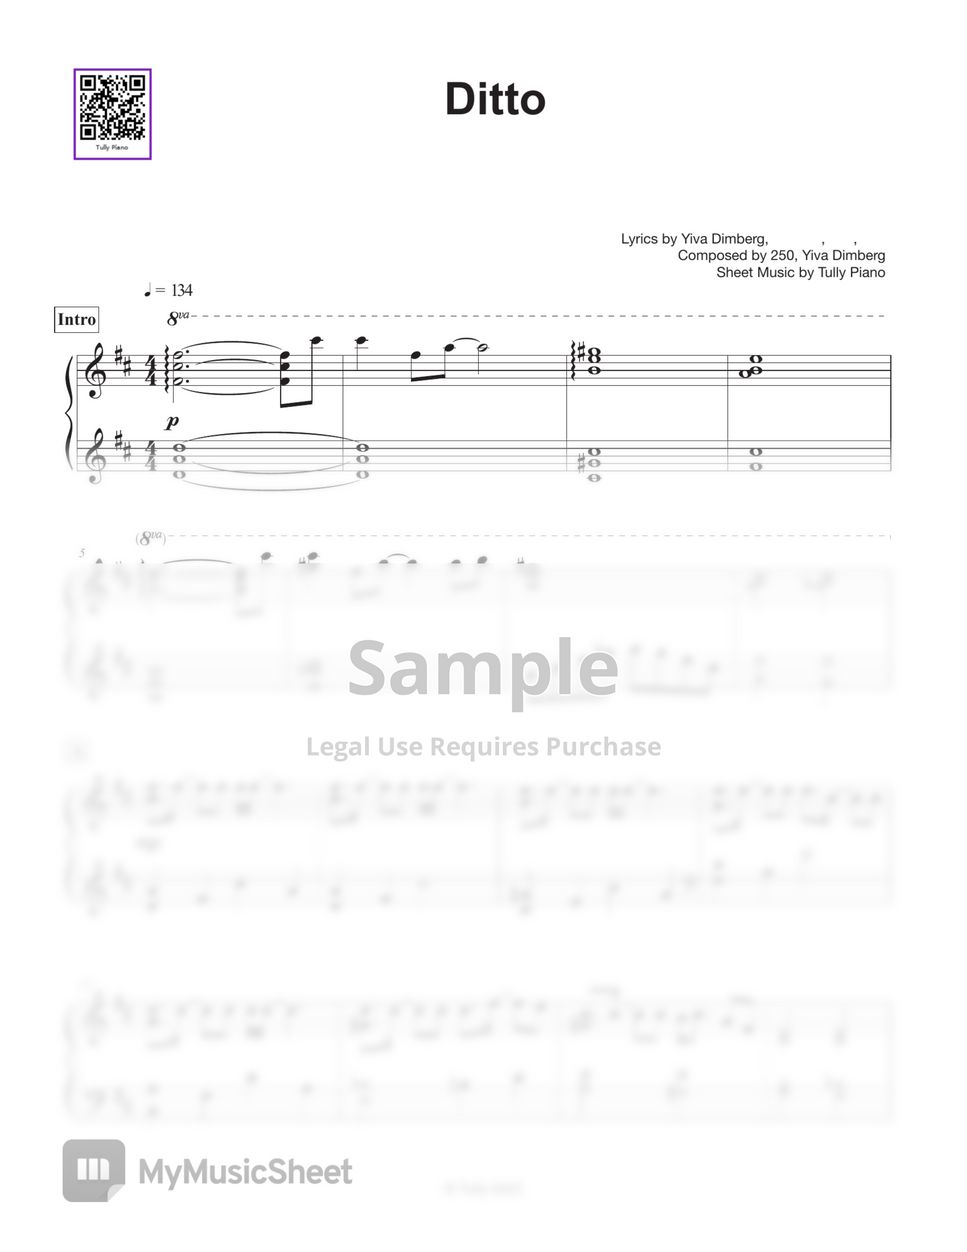 Ditto – NewJeans Sheet music for Piano (Solo)